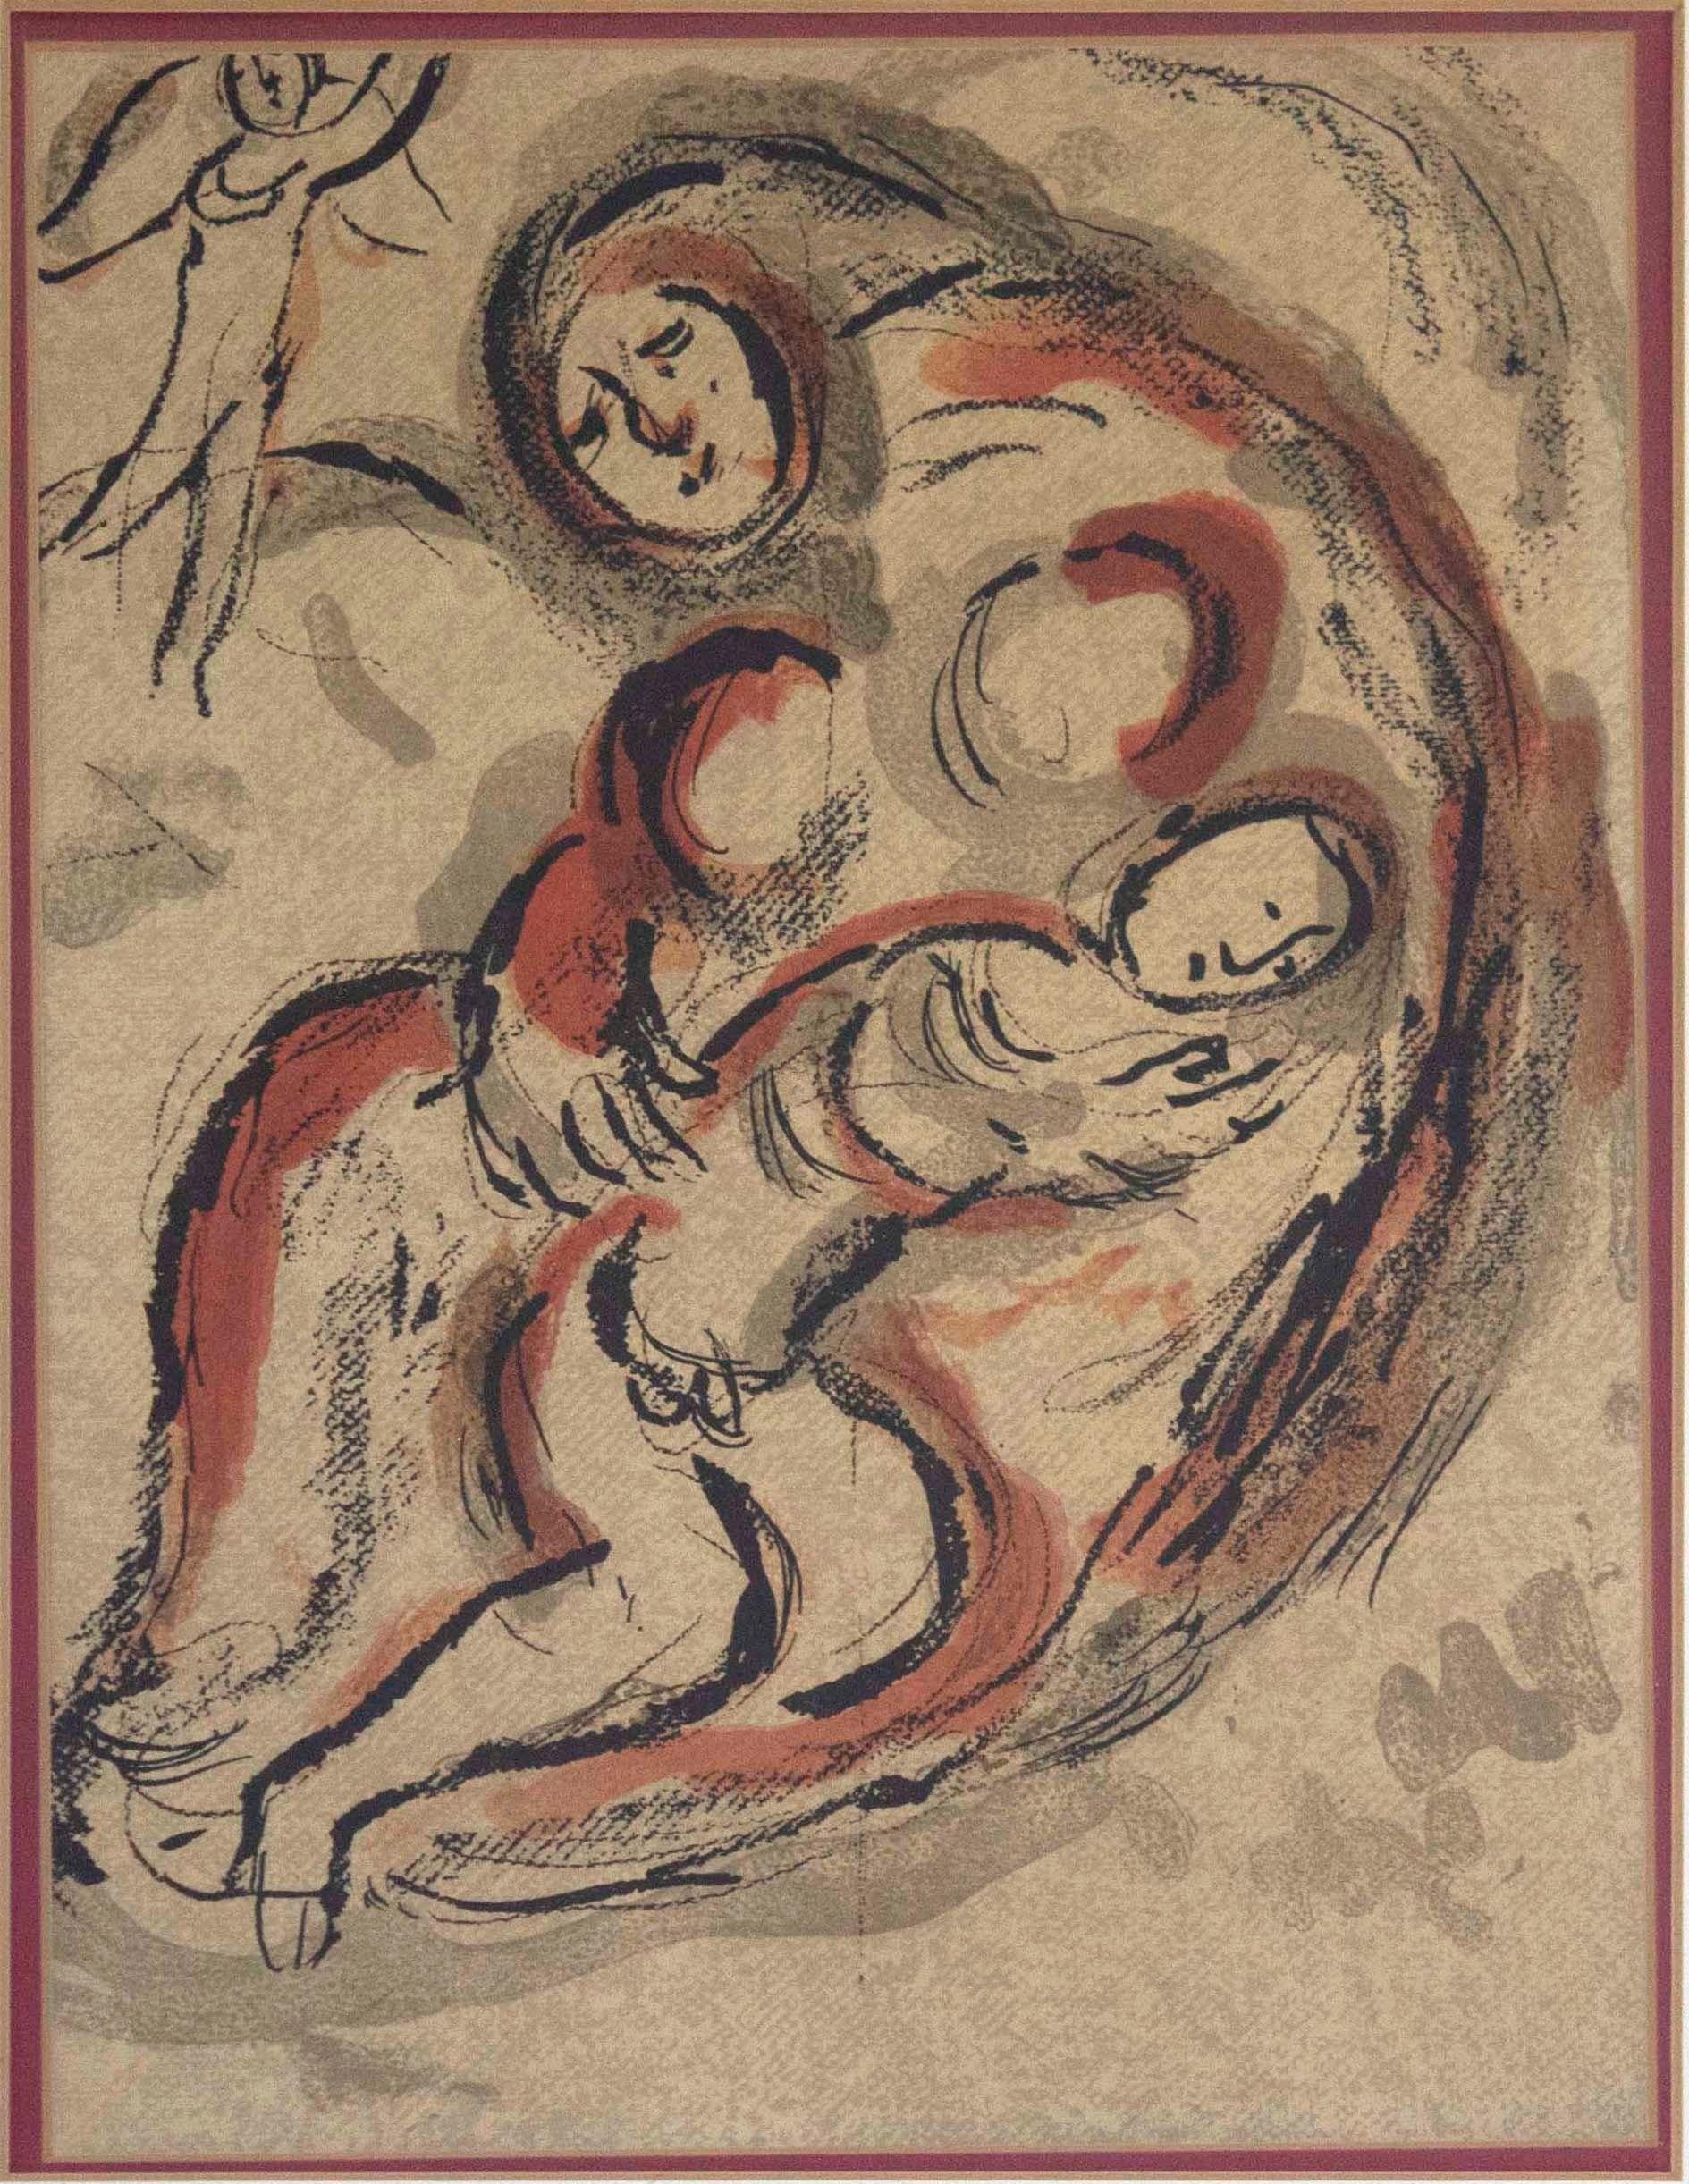 A lovely lithograph titled Hagar in The Desert, Drawings from the Bible, by early modernist artist Marc Chagall. This example is an unsigned open edition of 6500. Published in 1960. Chagall said, “Since my early youth, I have been fascinated by the